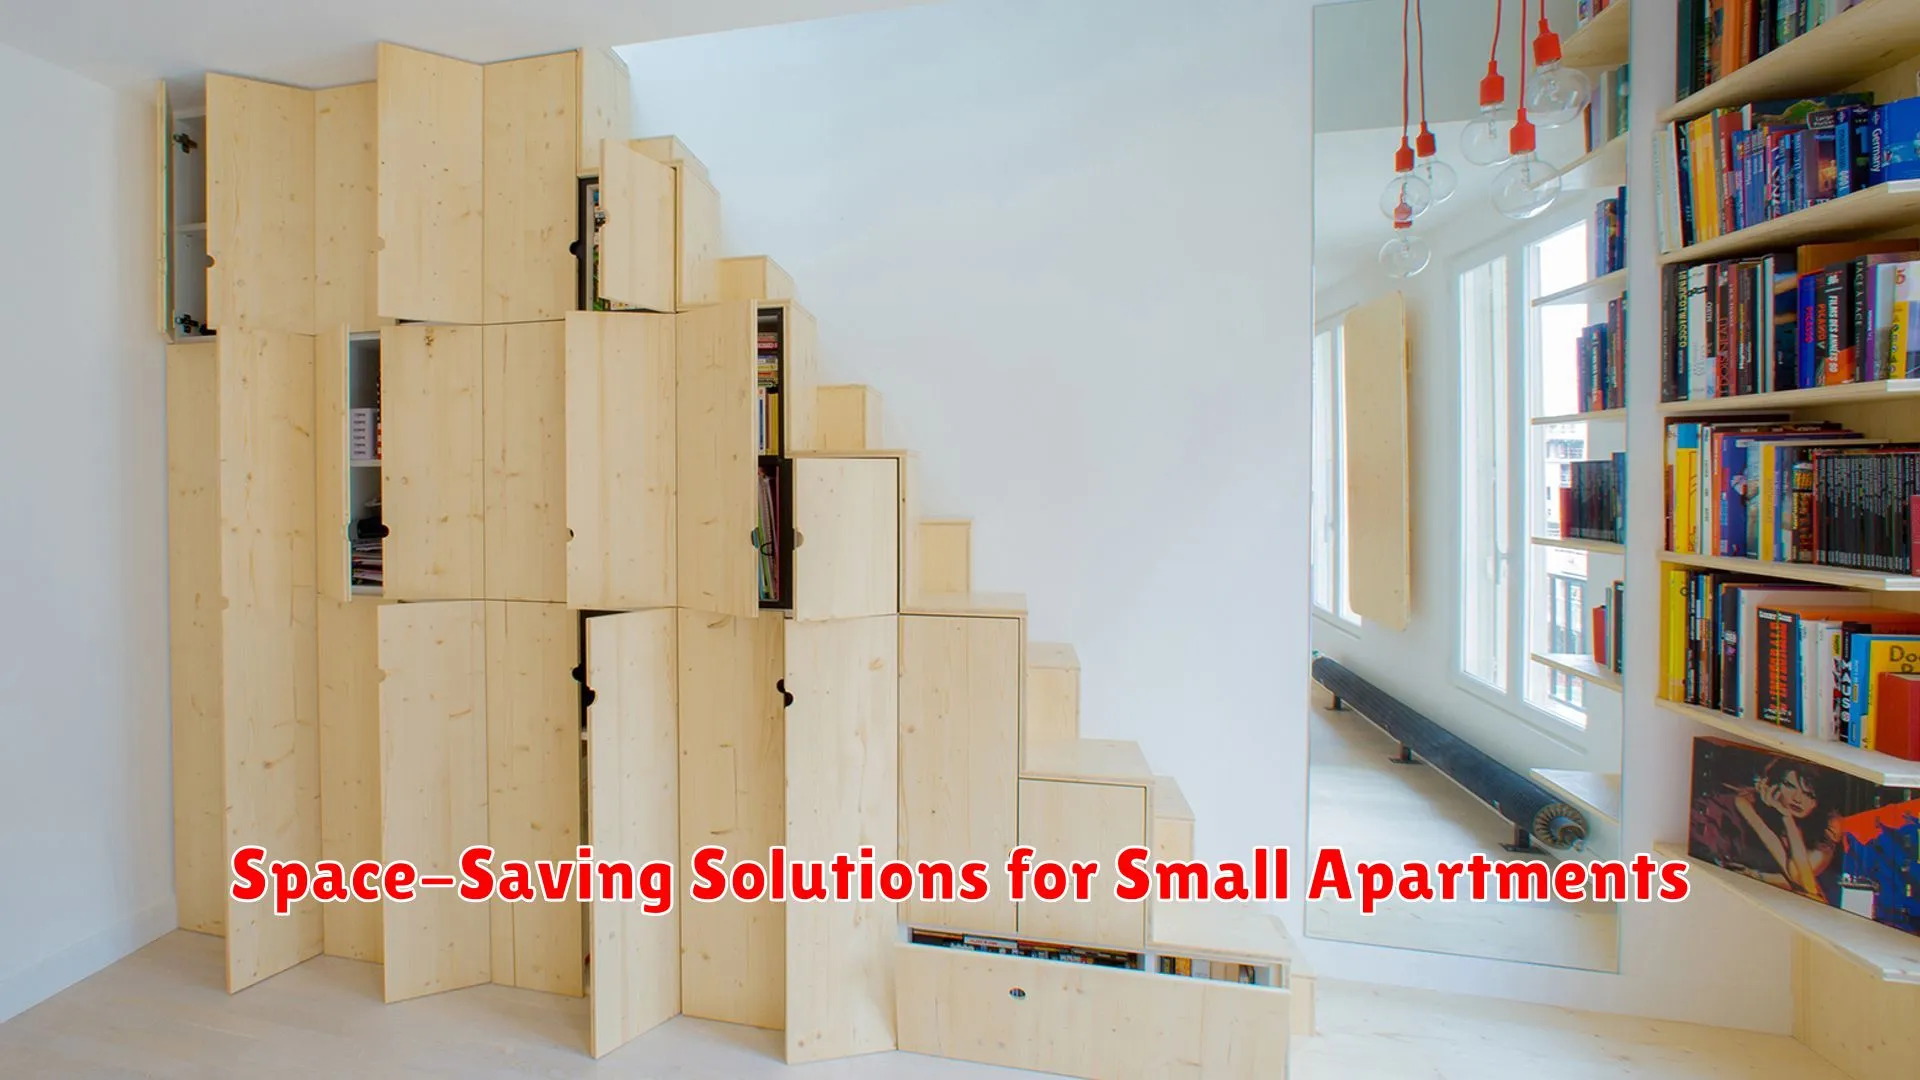 Space-Saving Solutions for Small Apartments